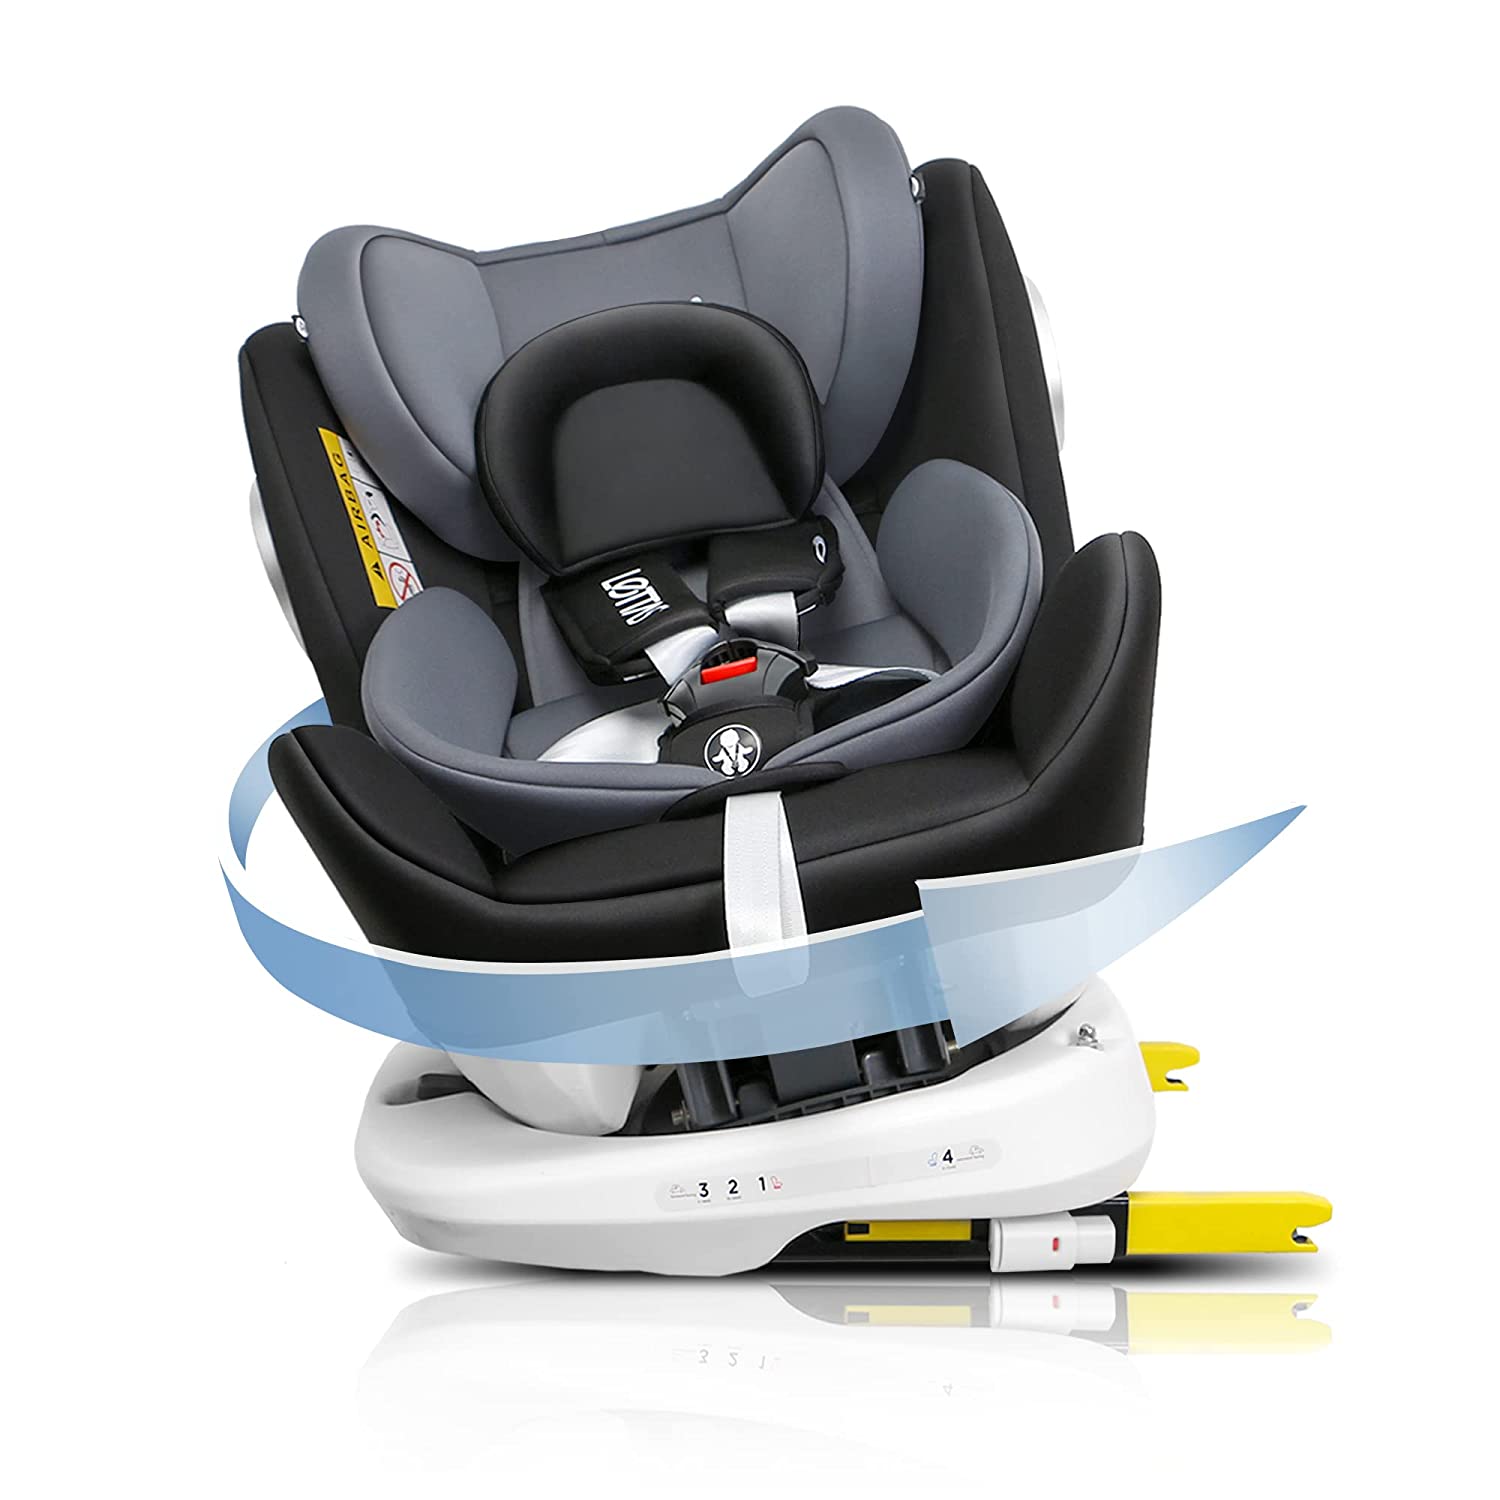 LETTAS Child Seat 360° Rotatable Child Car Seat with Isofix from Birth to 12 Years, 0-36 kg, Group 0+/1/2/3